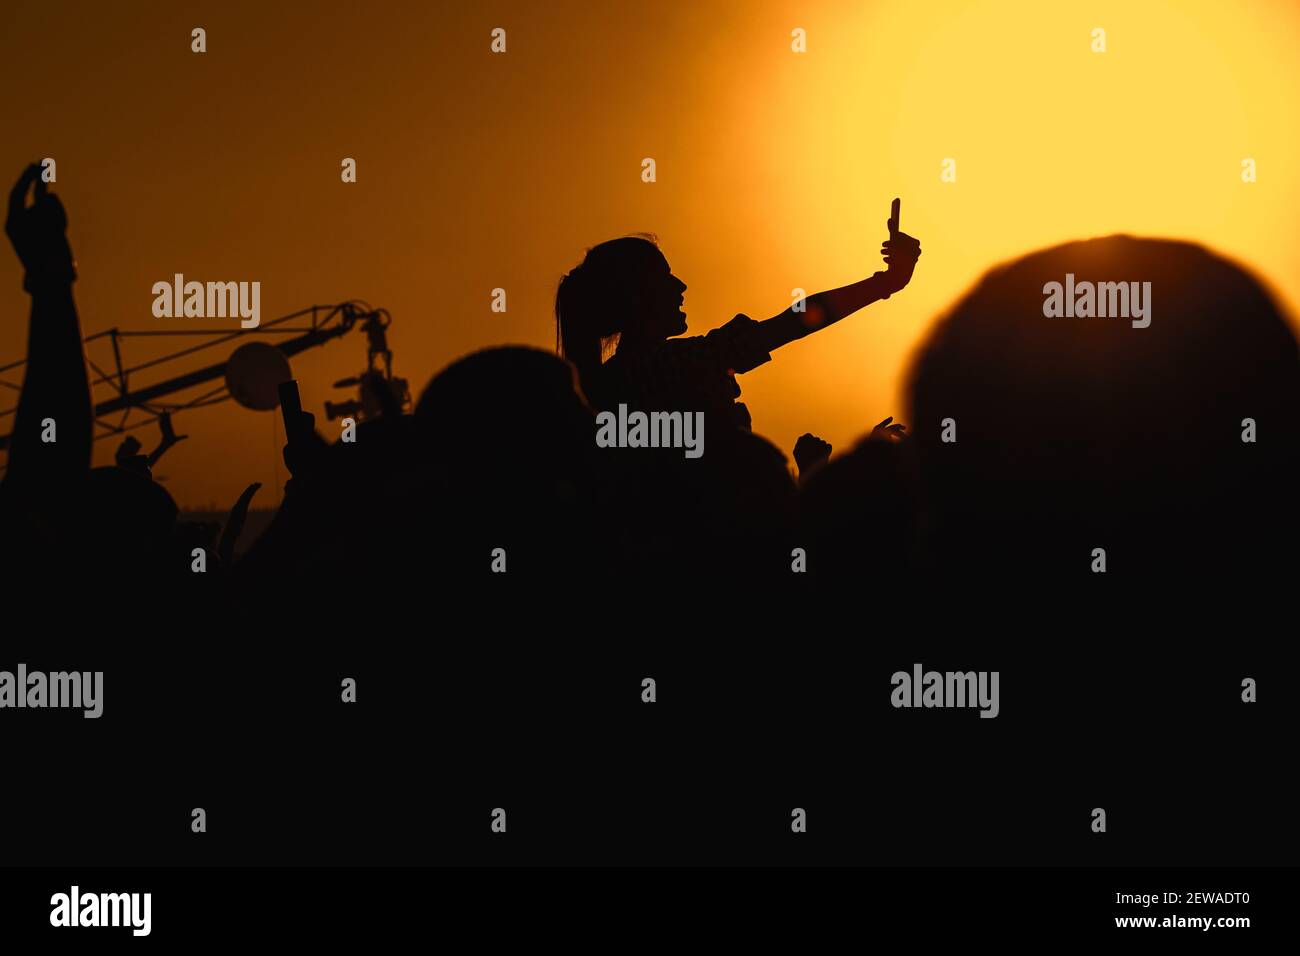 Girl silhouette on a big concert show Stock Photo